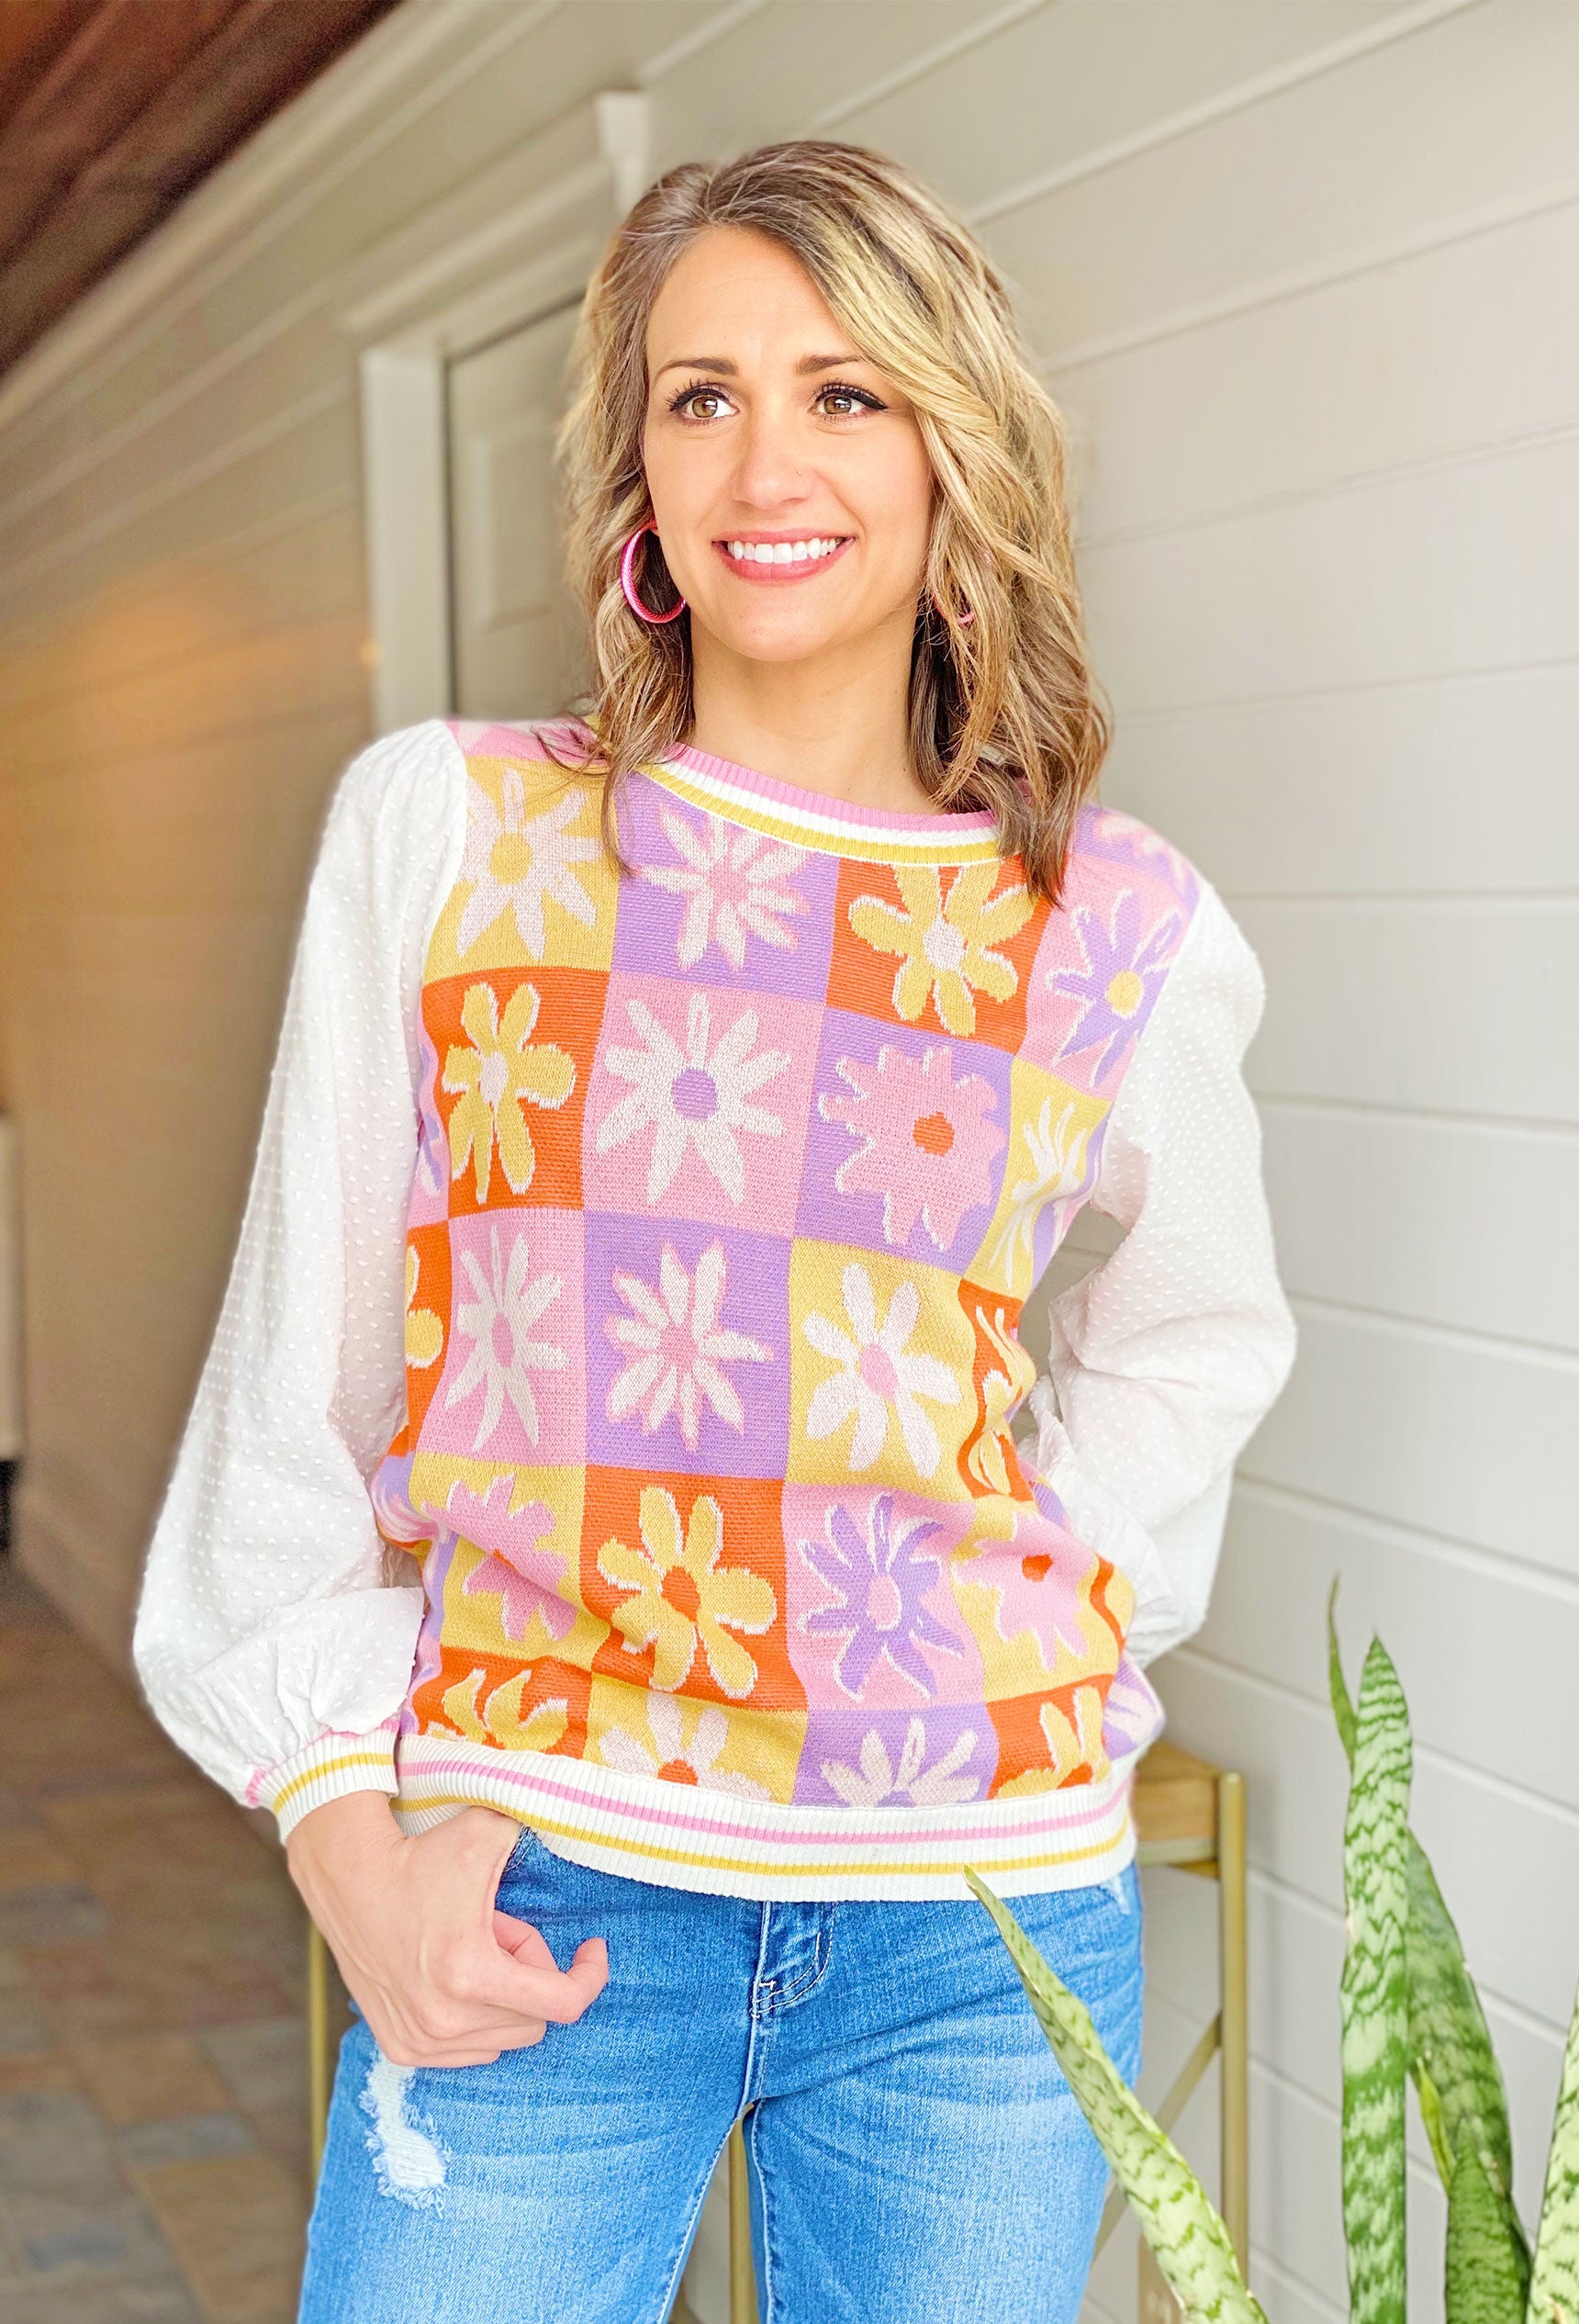 Flower Market Strolls Sweater, color block design with flowers, white sleeves